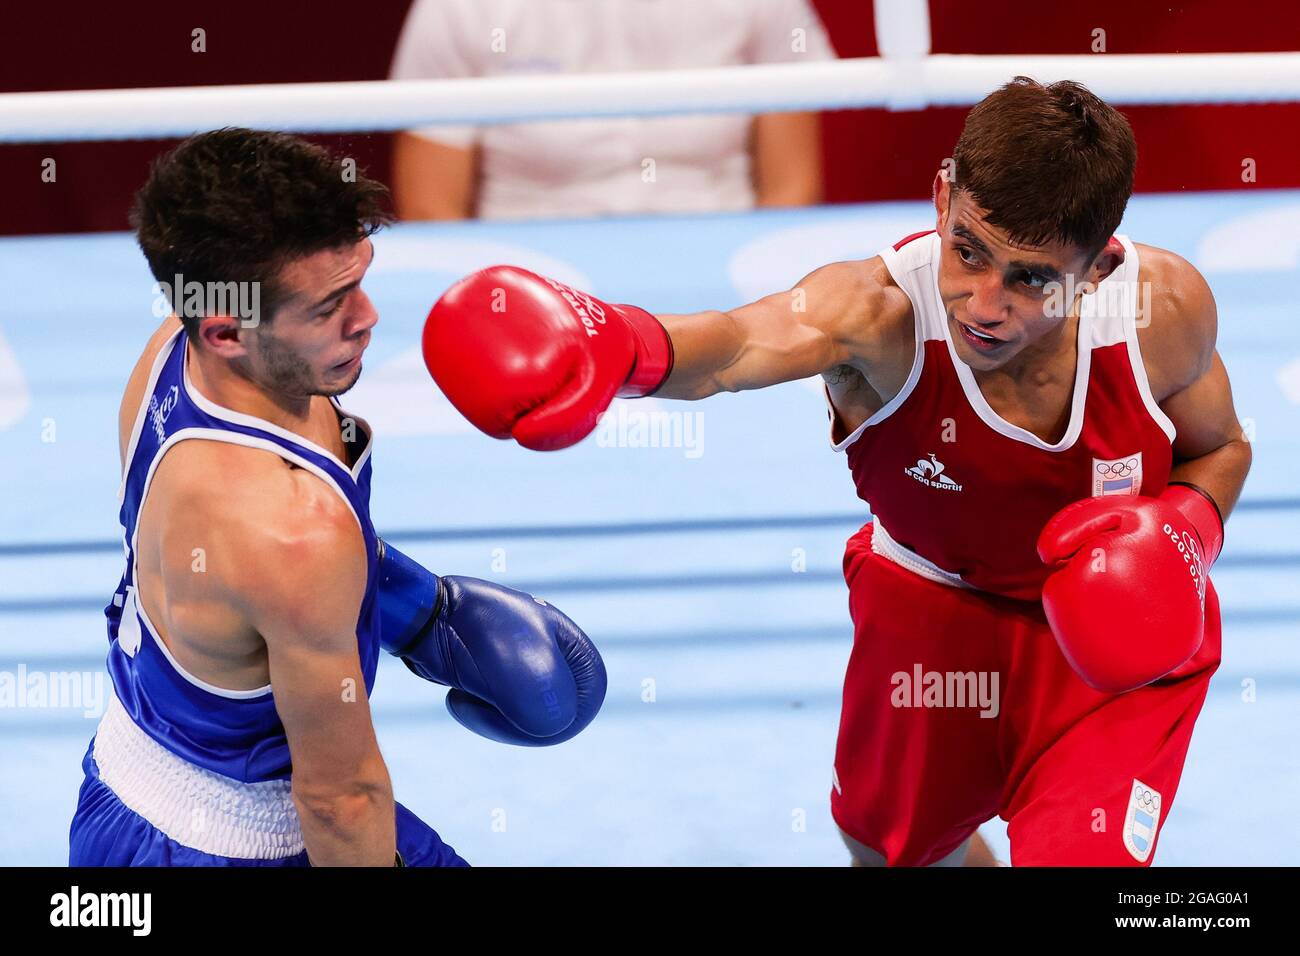 Tokyo, Japan, 26 July, 2021. Ramon Nicanor QUIROGA of Argentina throws a punch during the Men's Flyweight Boxing Preliminary match between Gabriel ESCOBAR MASCUNANO of Spain and Ramon Nicanor QUIROGA of Argentina on Day 3 of the Tokyo 2020 Olympic Games. Credit: Pete Dovgan/Speed Media/Alamy Live News Stock Photo